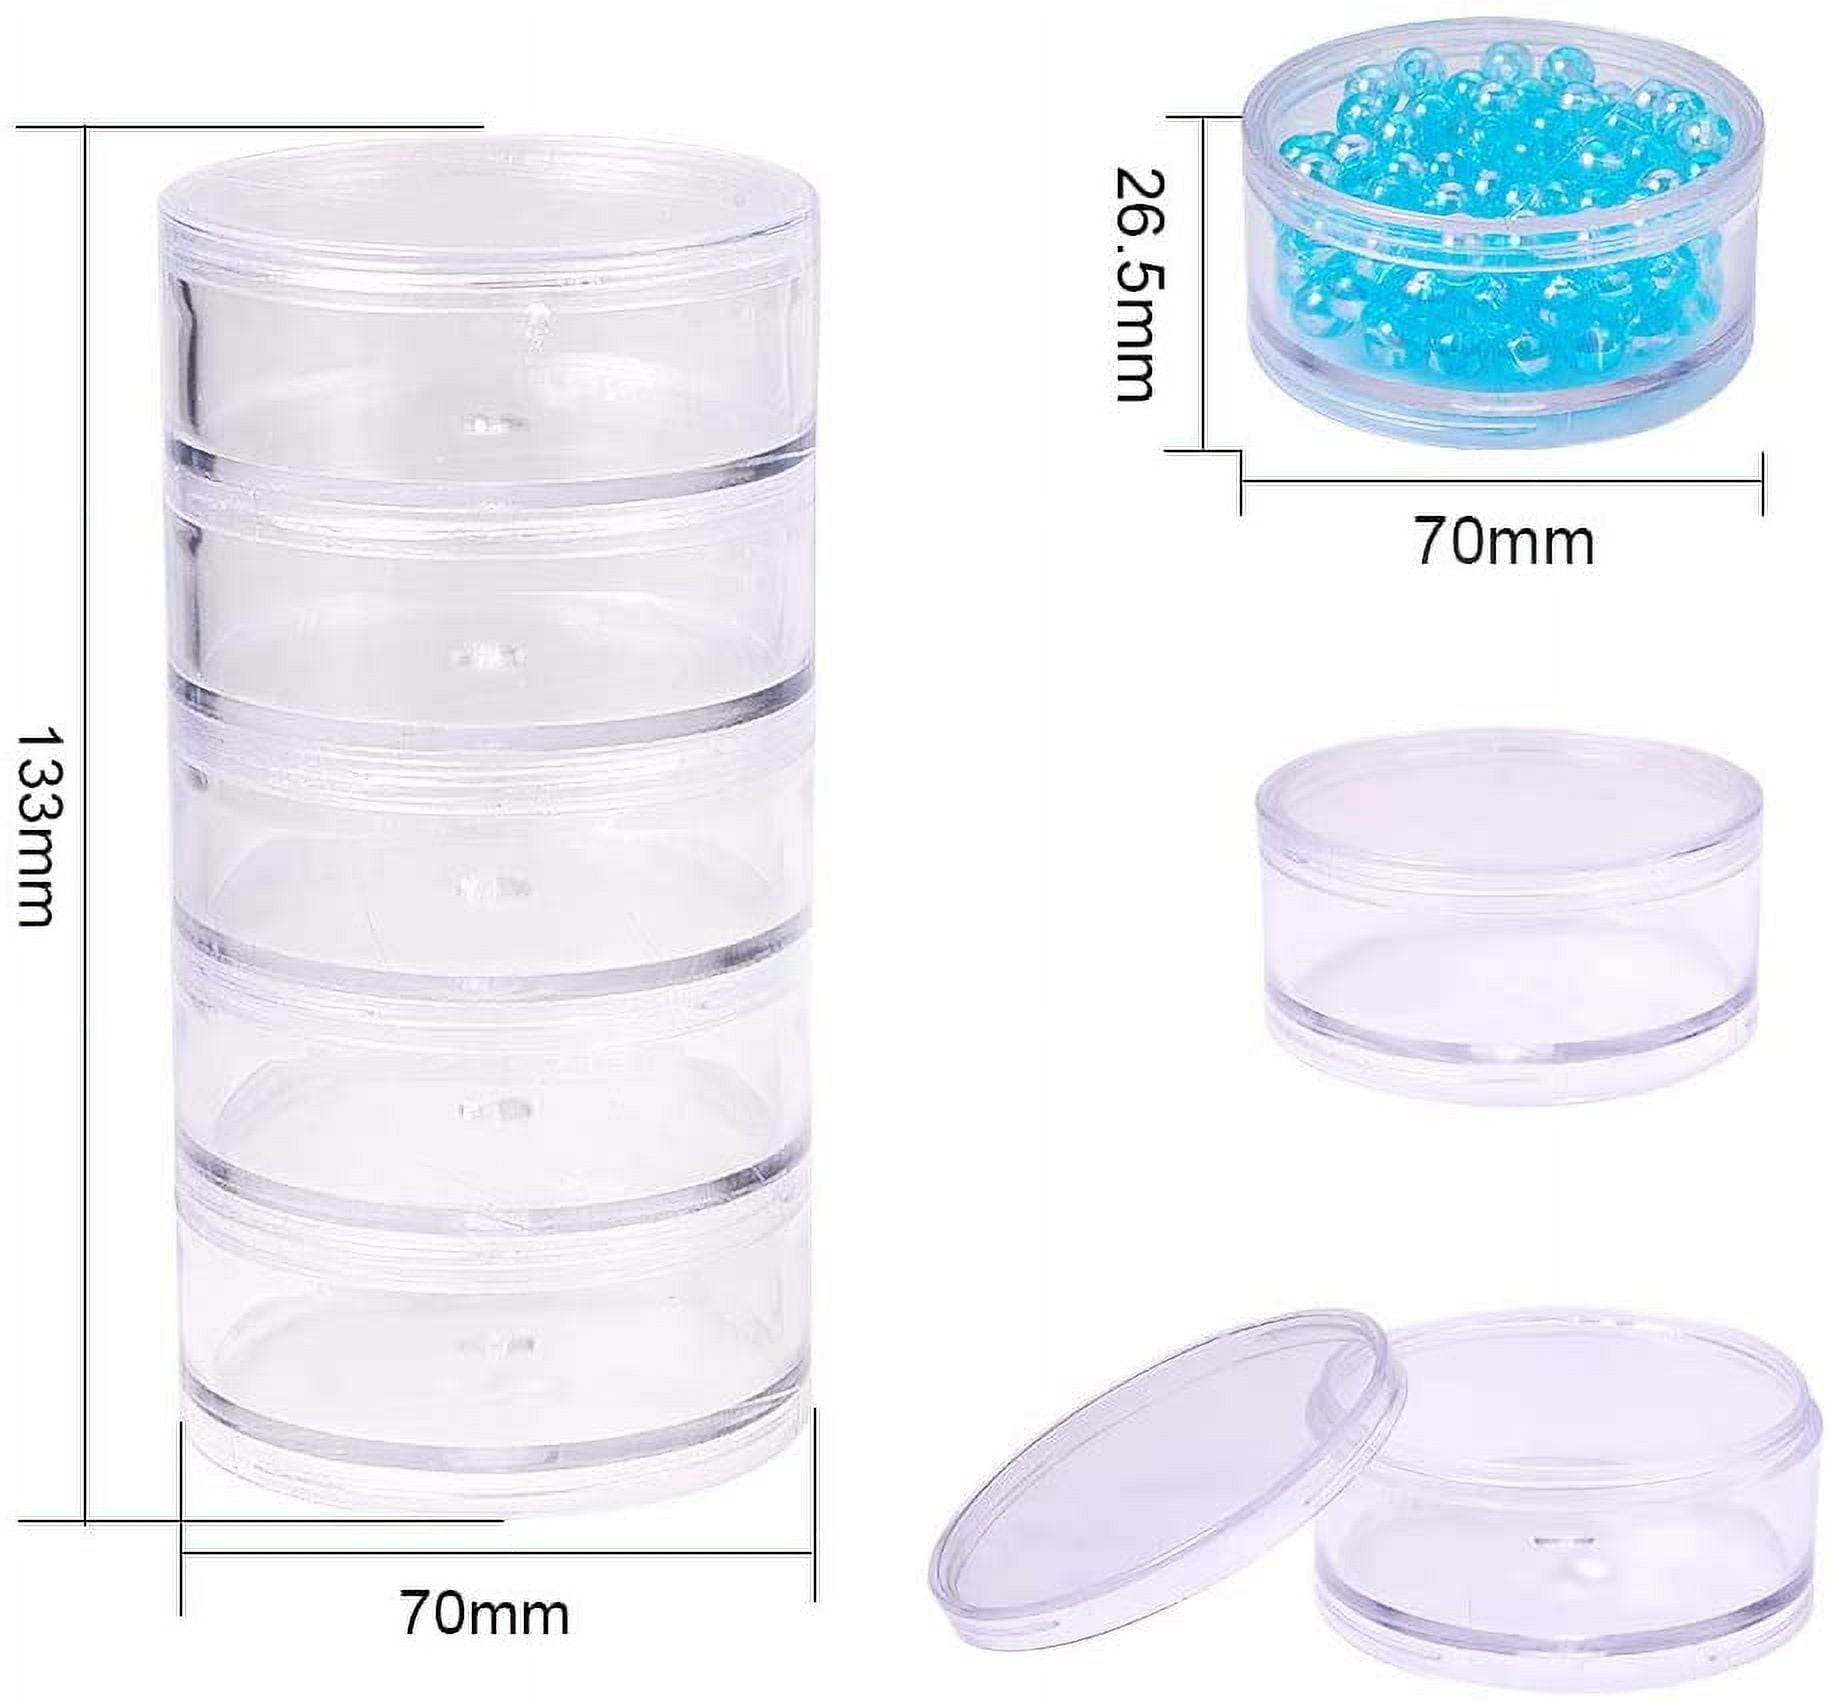 2x 5 Stacking Bead Containers Clear Screw Top Make Up Storage Organizer Box - Clear, 77x27mm, Size: 77 mm x 27 mm